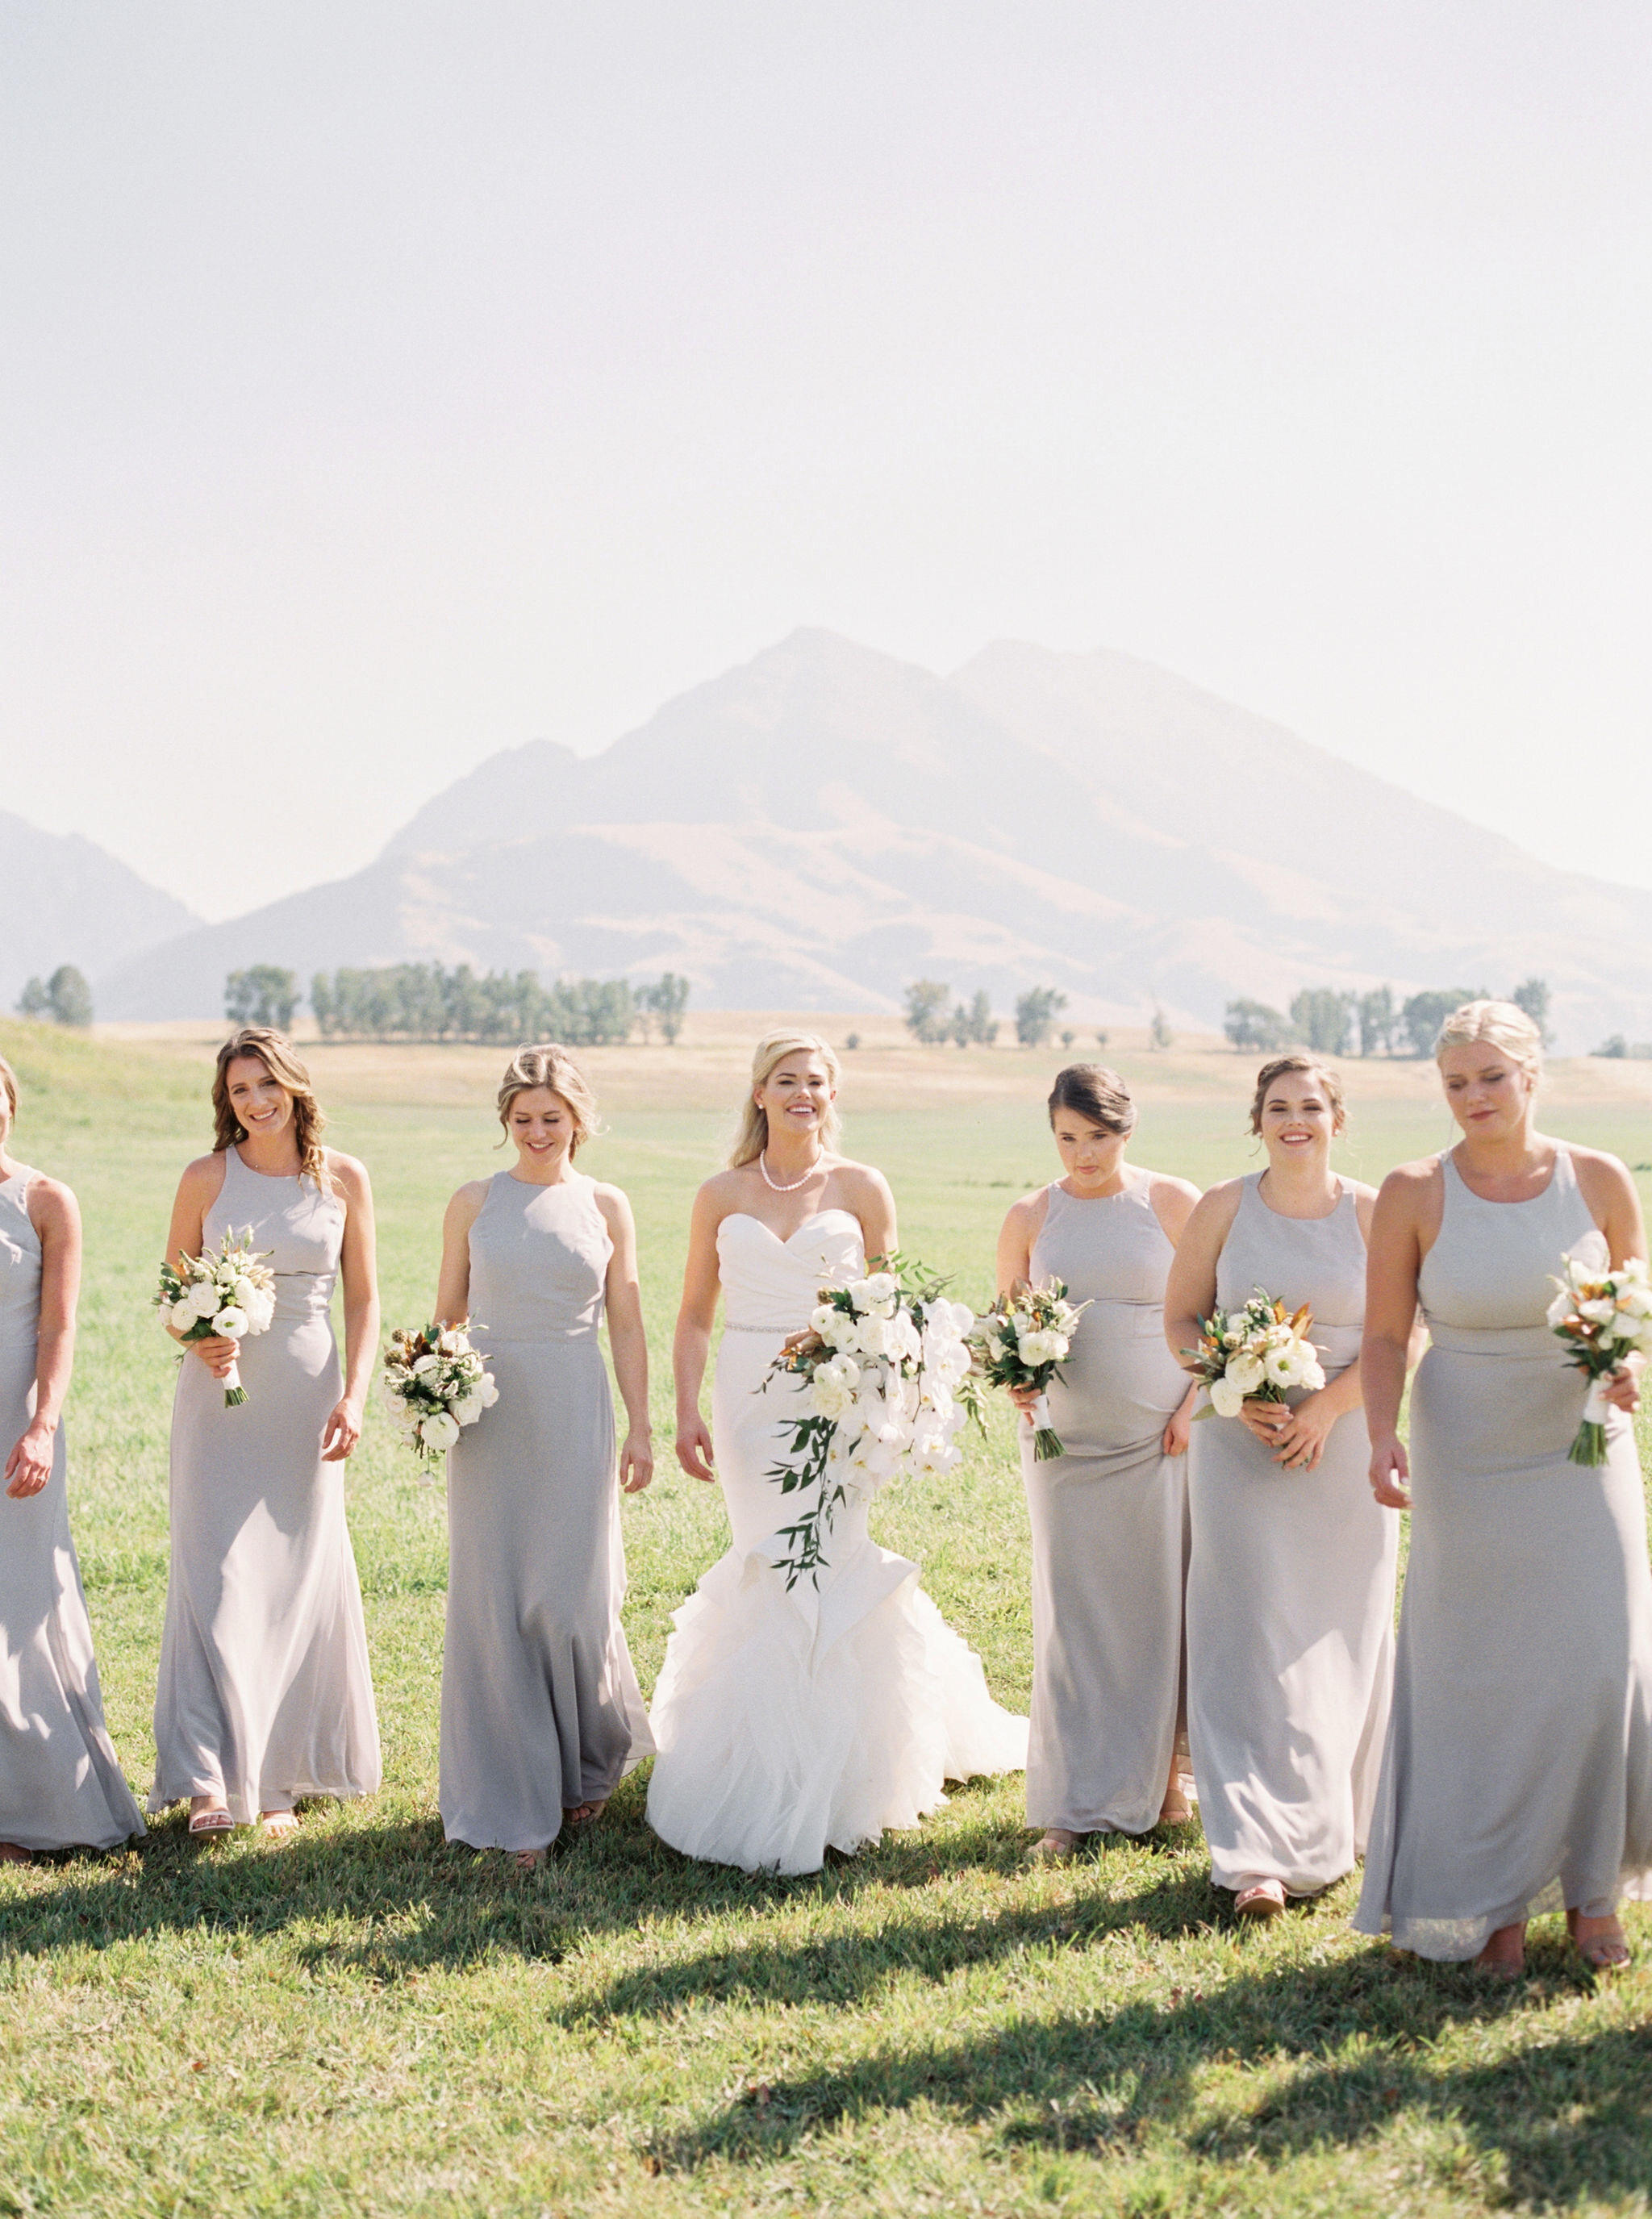 Christa + Mike | Bridal Bliss